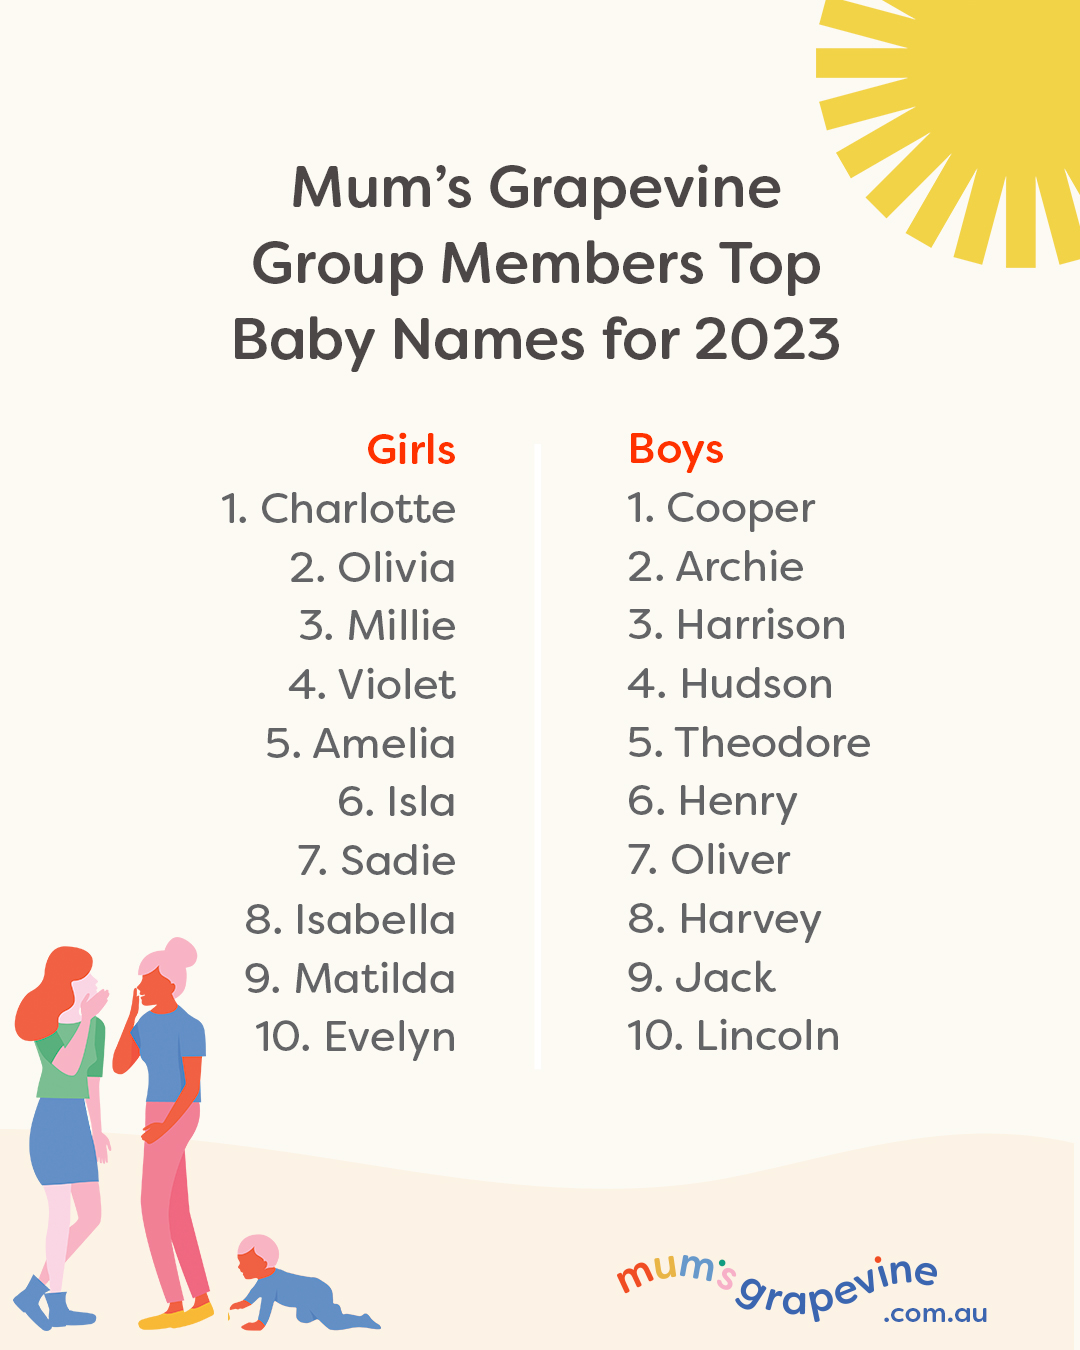 Mum's Grapevine group members top baby names for 2023